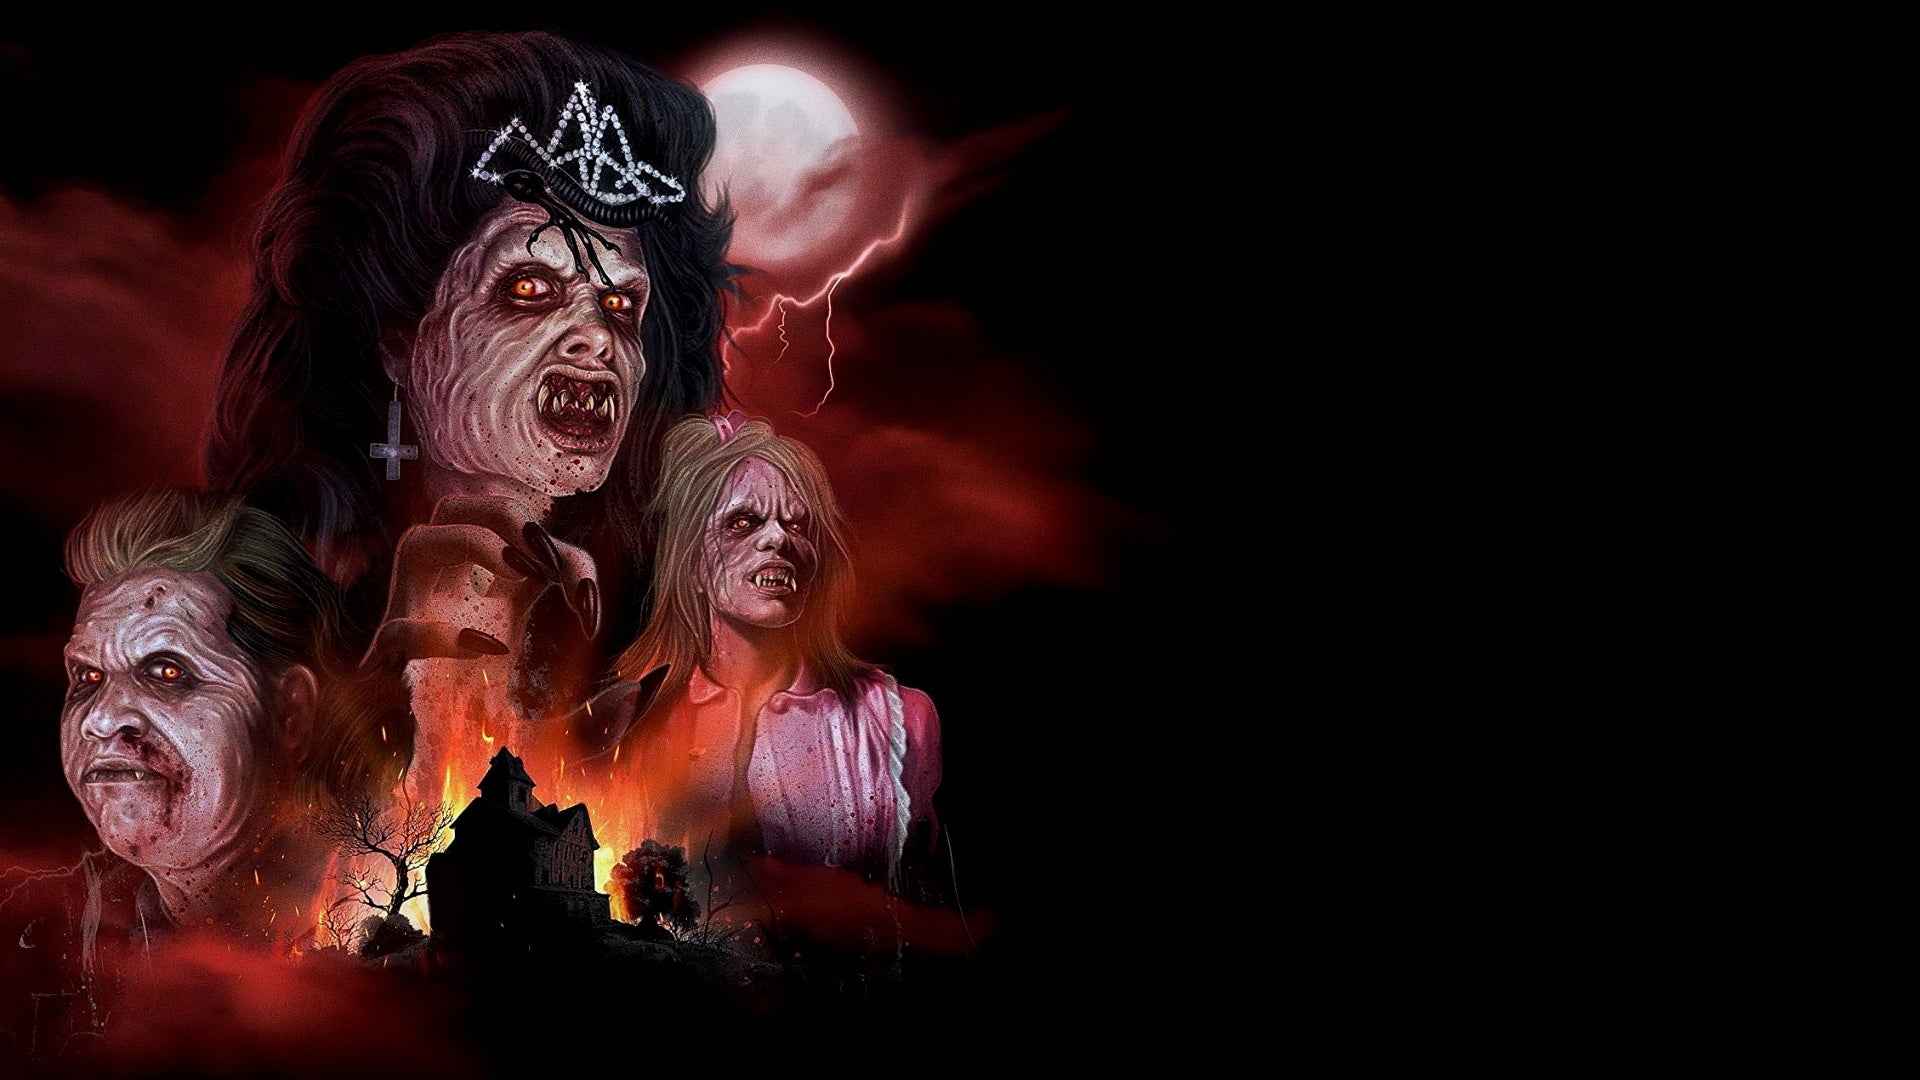 Night Of The Demons - Limited Edition SteelBook